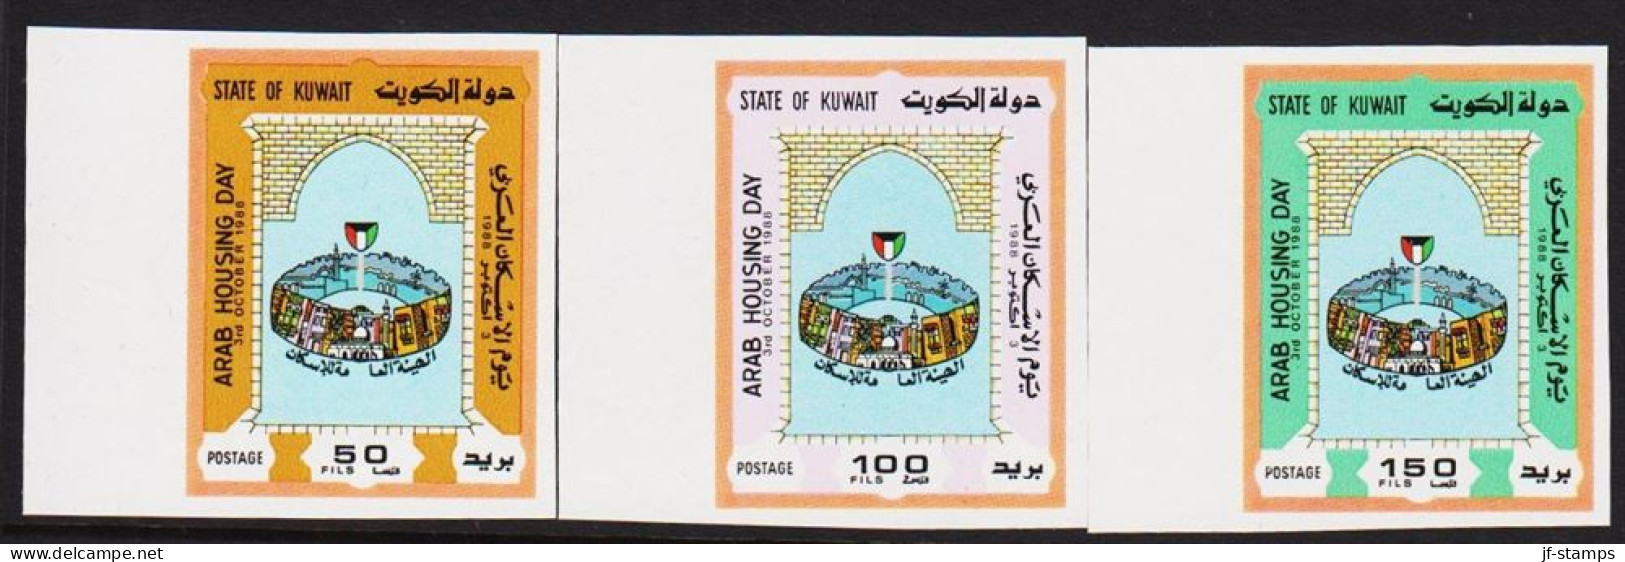 1988. KUWAIT. ARAB HOUSING DAY In Complete Set IMPERFORATE. Never Hinged. Unusual.  (Michel 1170-1172 U) - JF544553 - Koweït